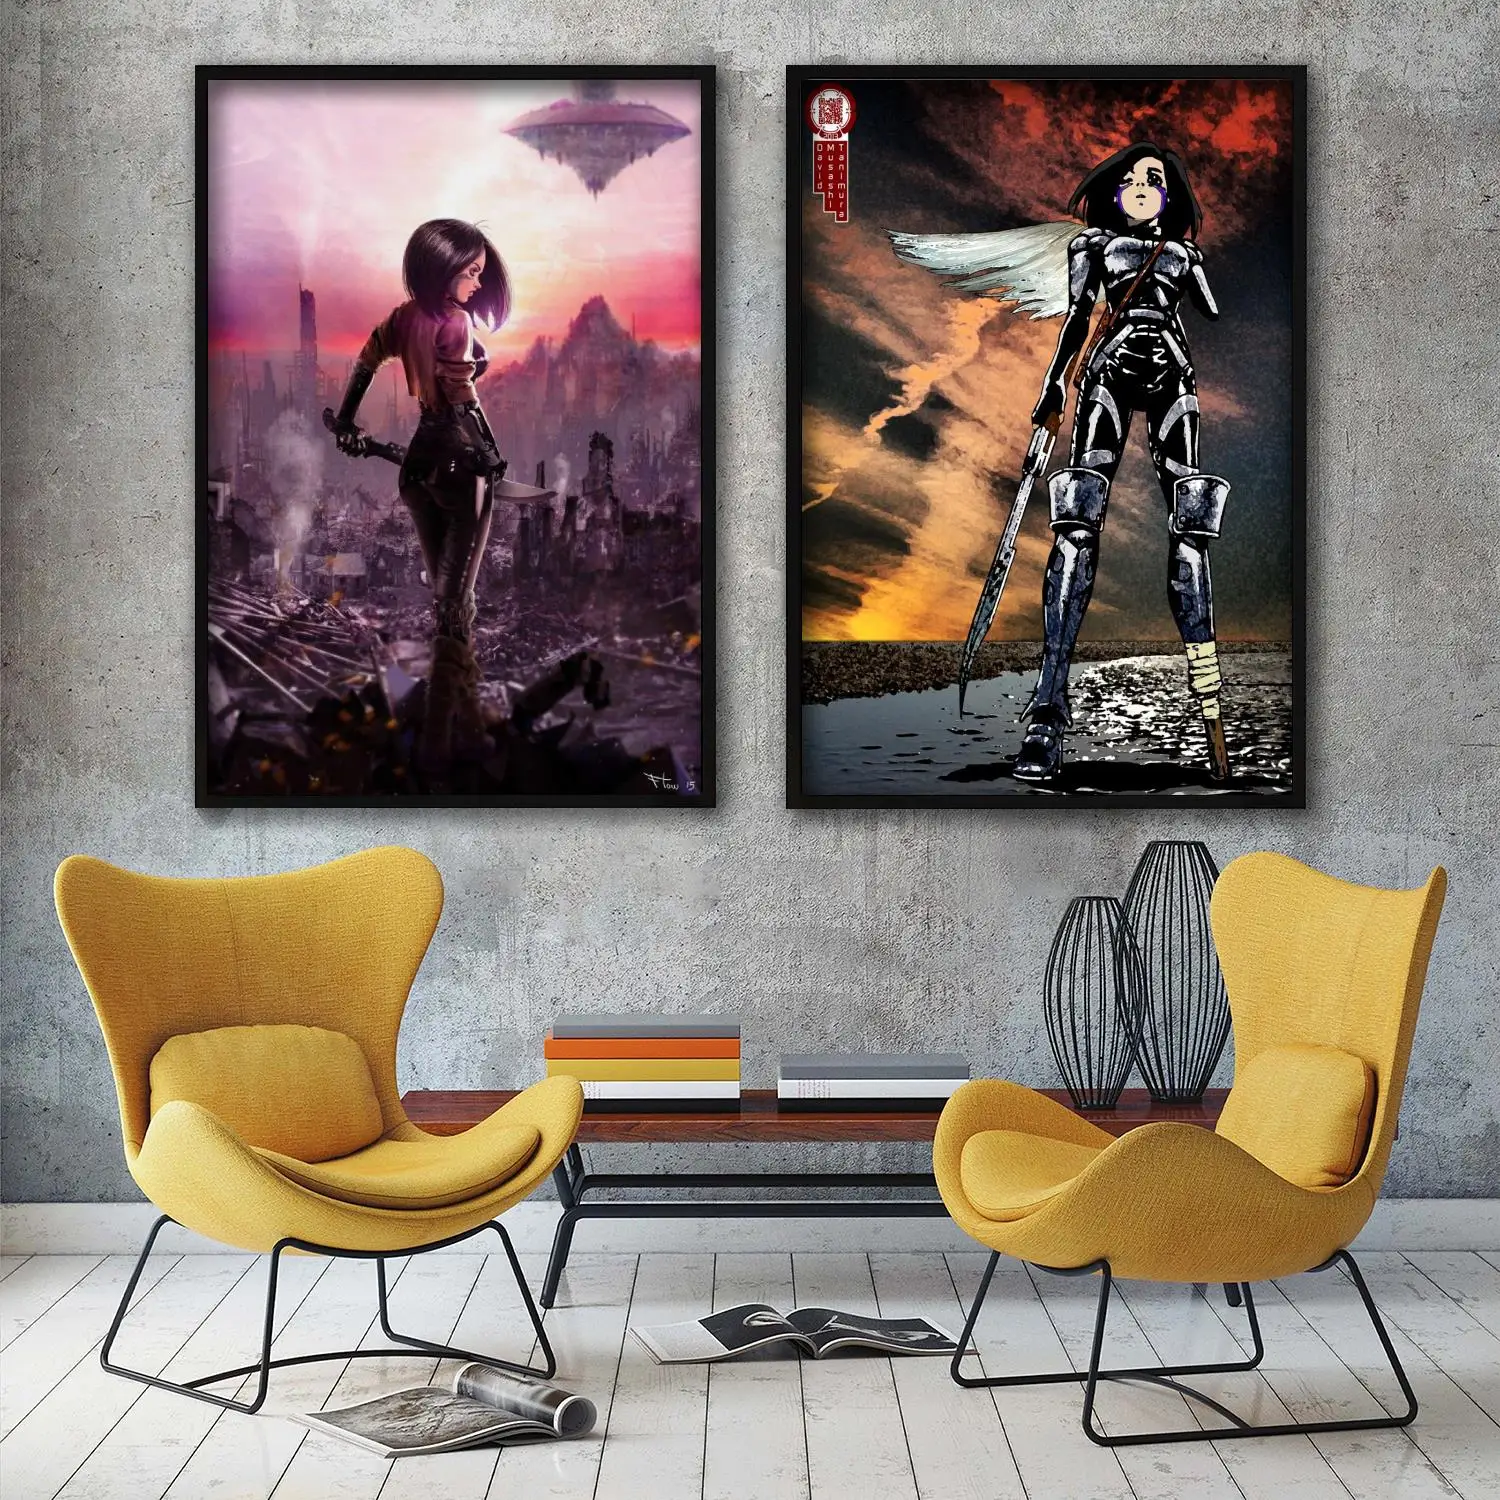 

alita battle angel movie Decorative Painting Canvas 24x36 Poster Wall Art Living Room Posters Bedroom Painting